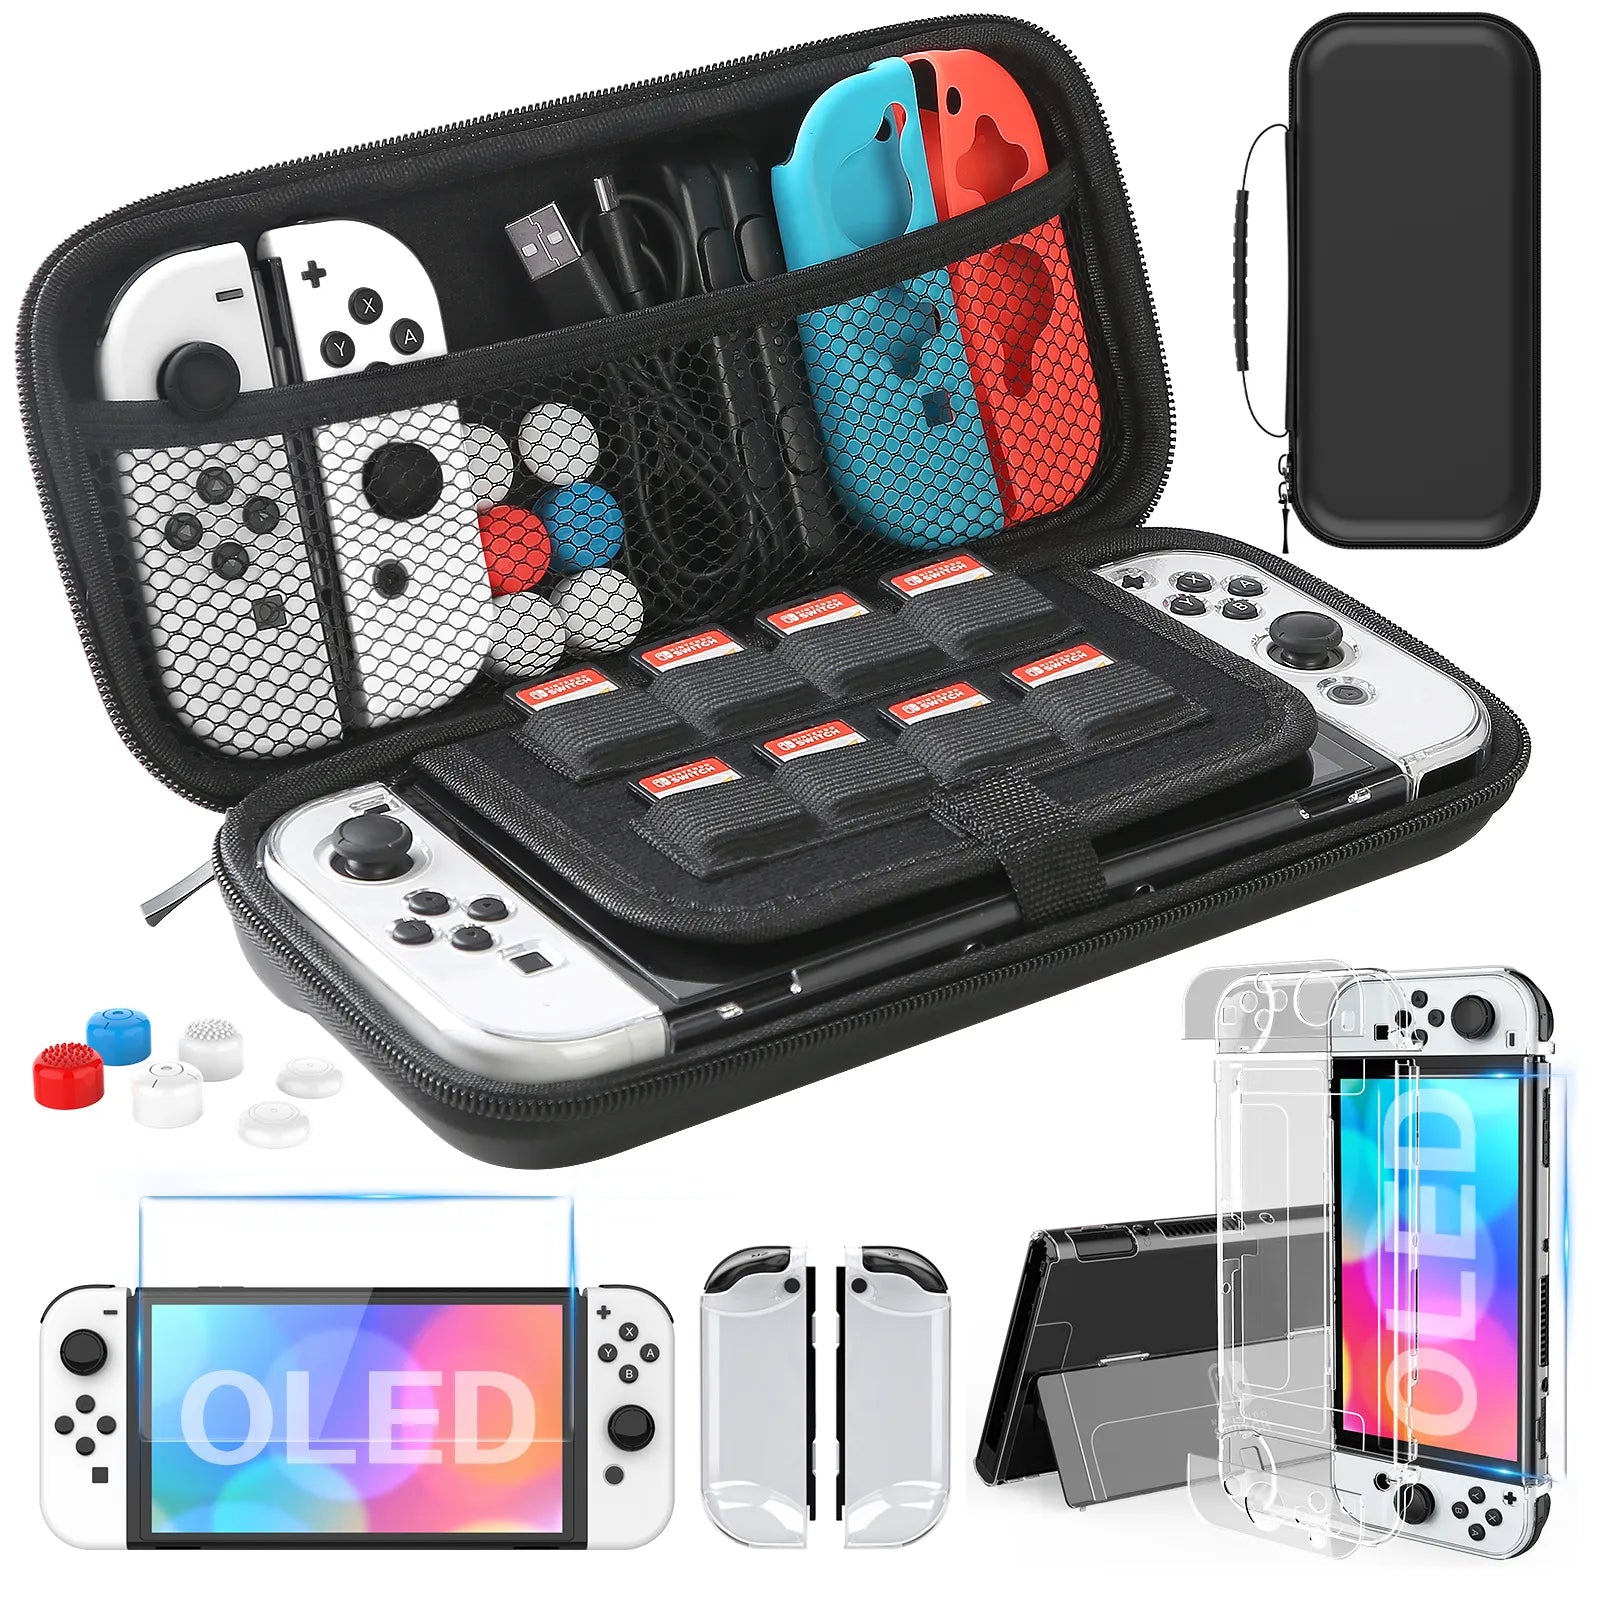 Switch OLED Model Carrying Case 9 in 1 Accessories Kit 